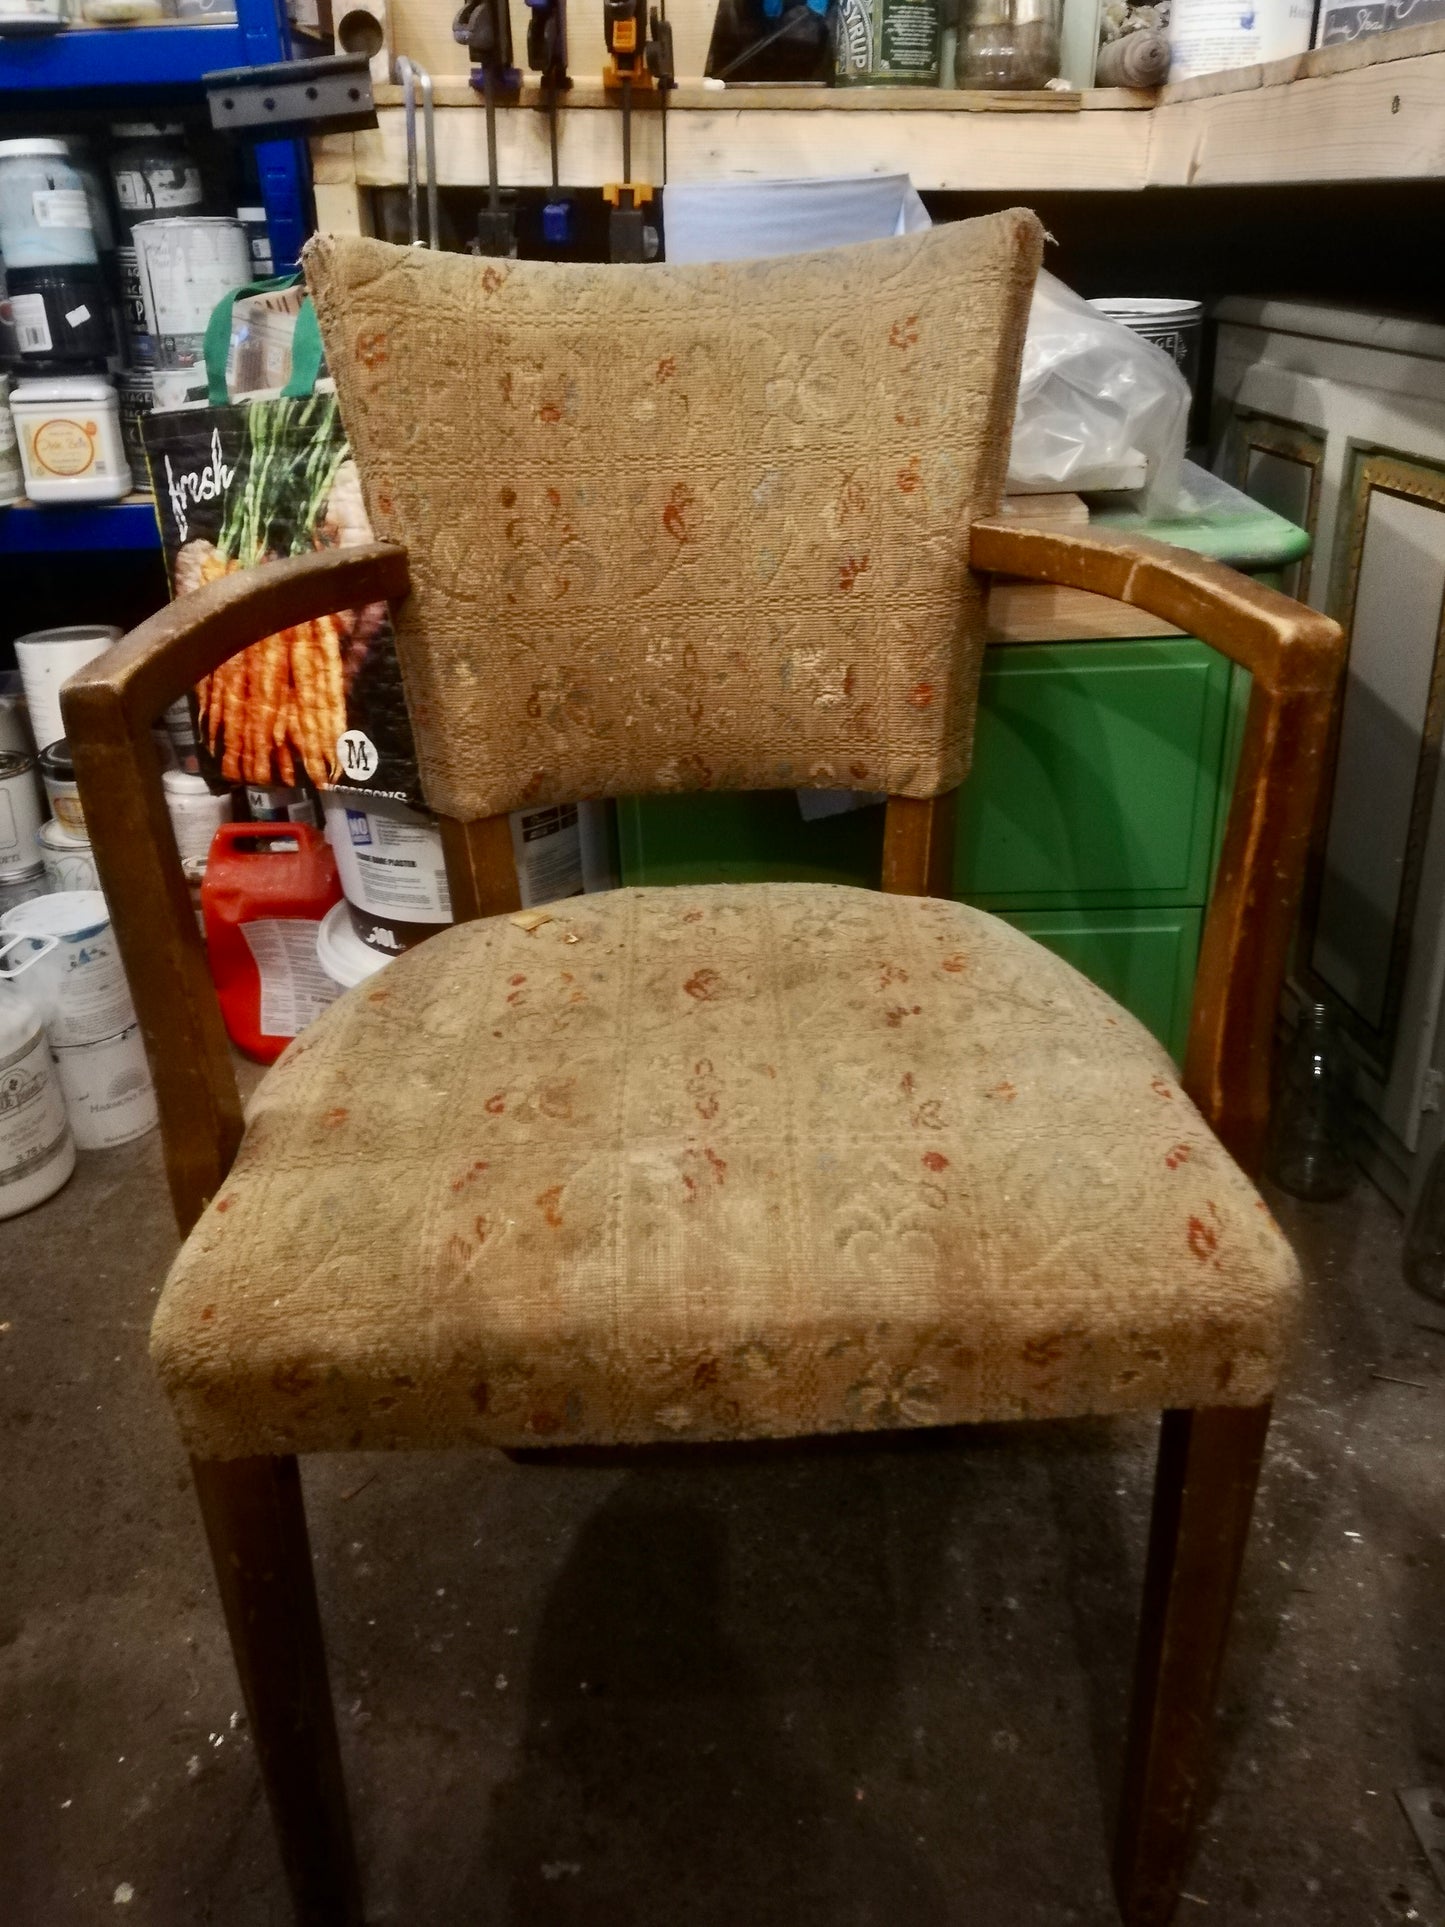 Vintage Deco chair available for reupholstery and painting your choice of colour